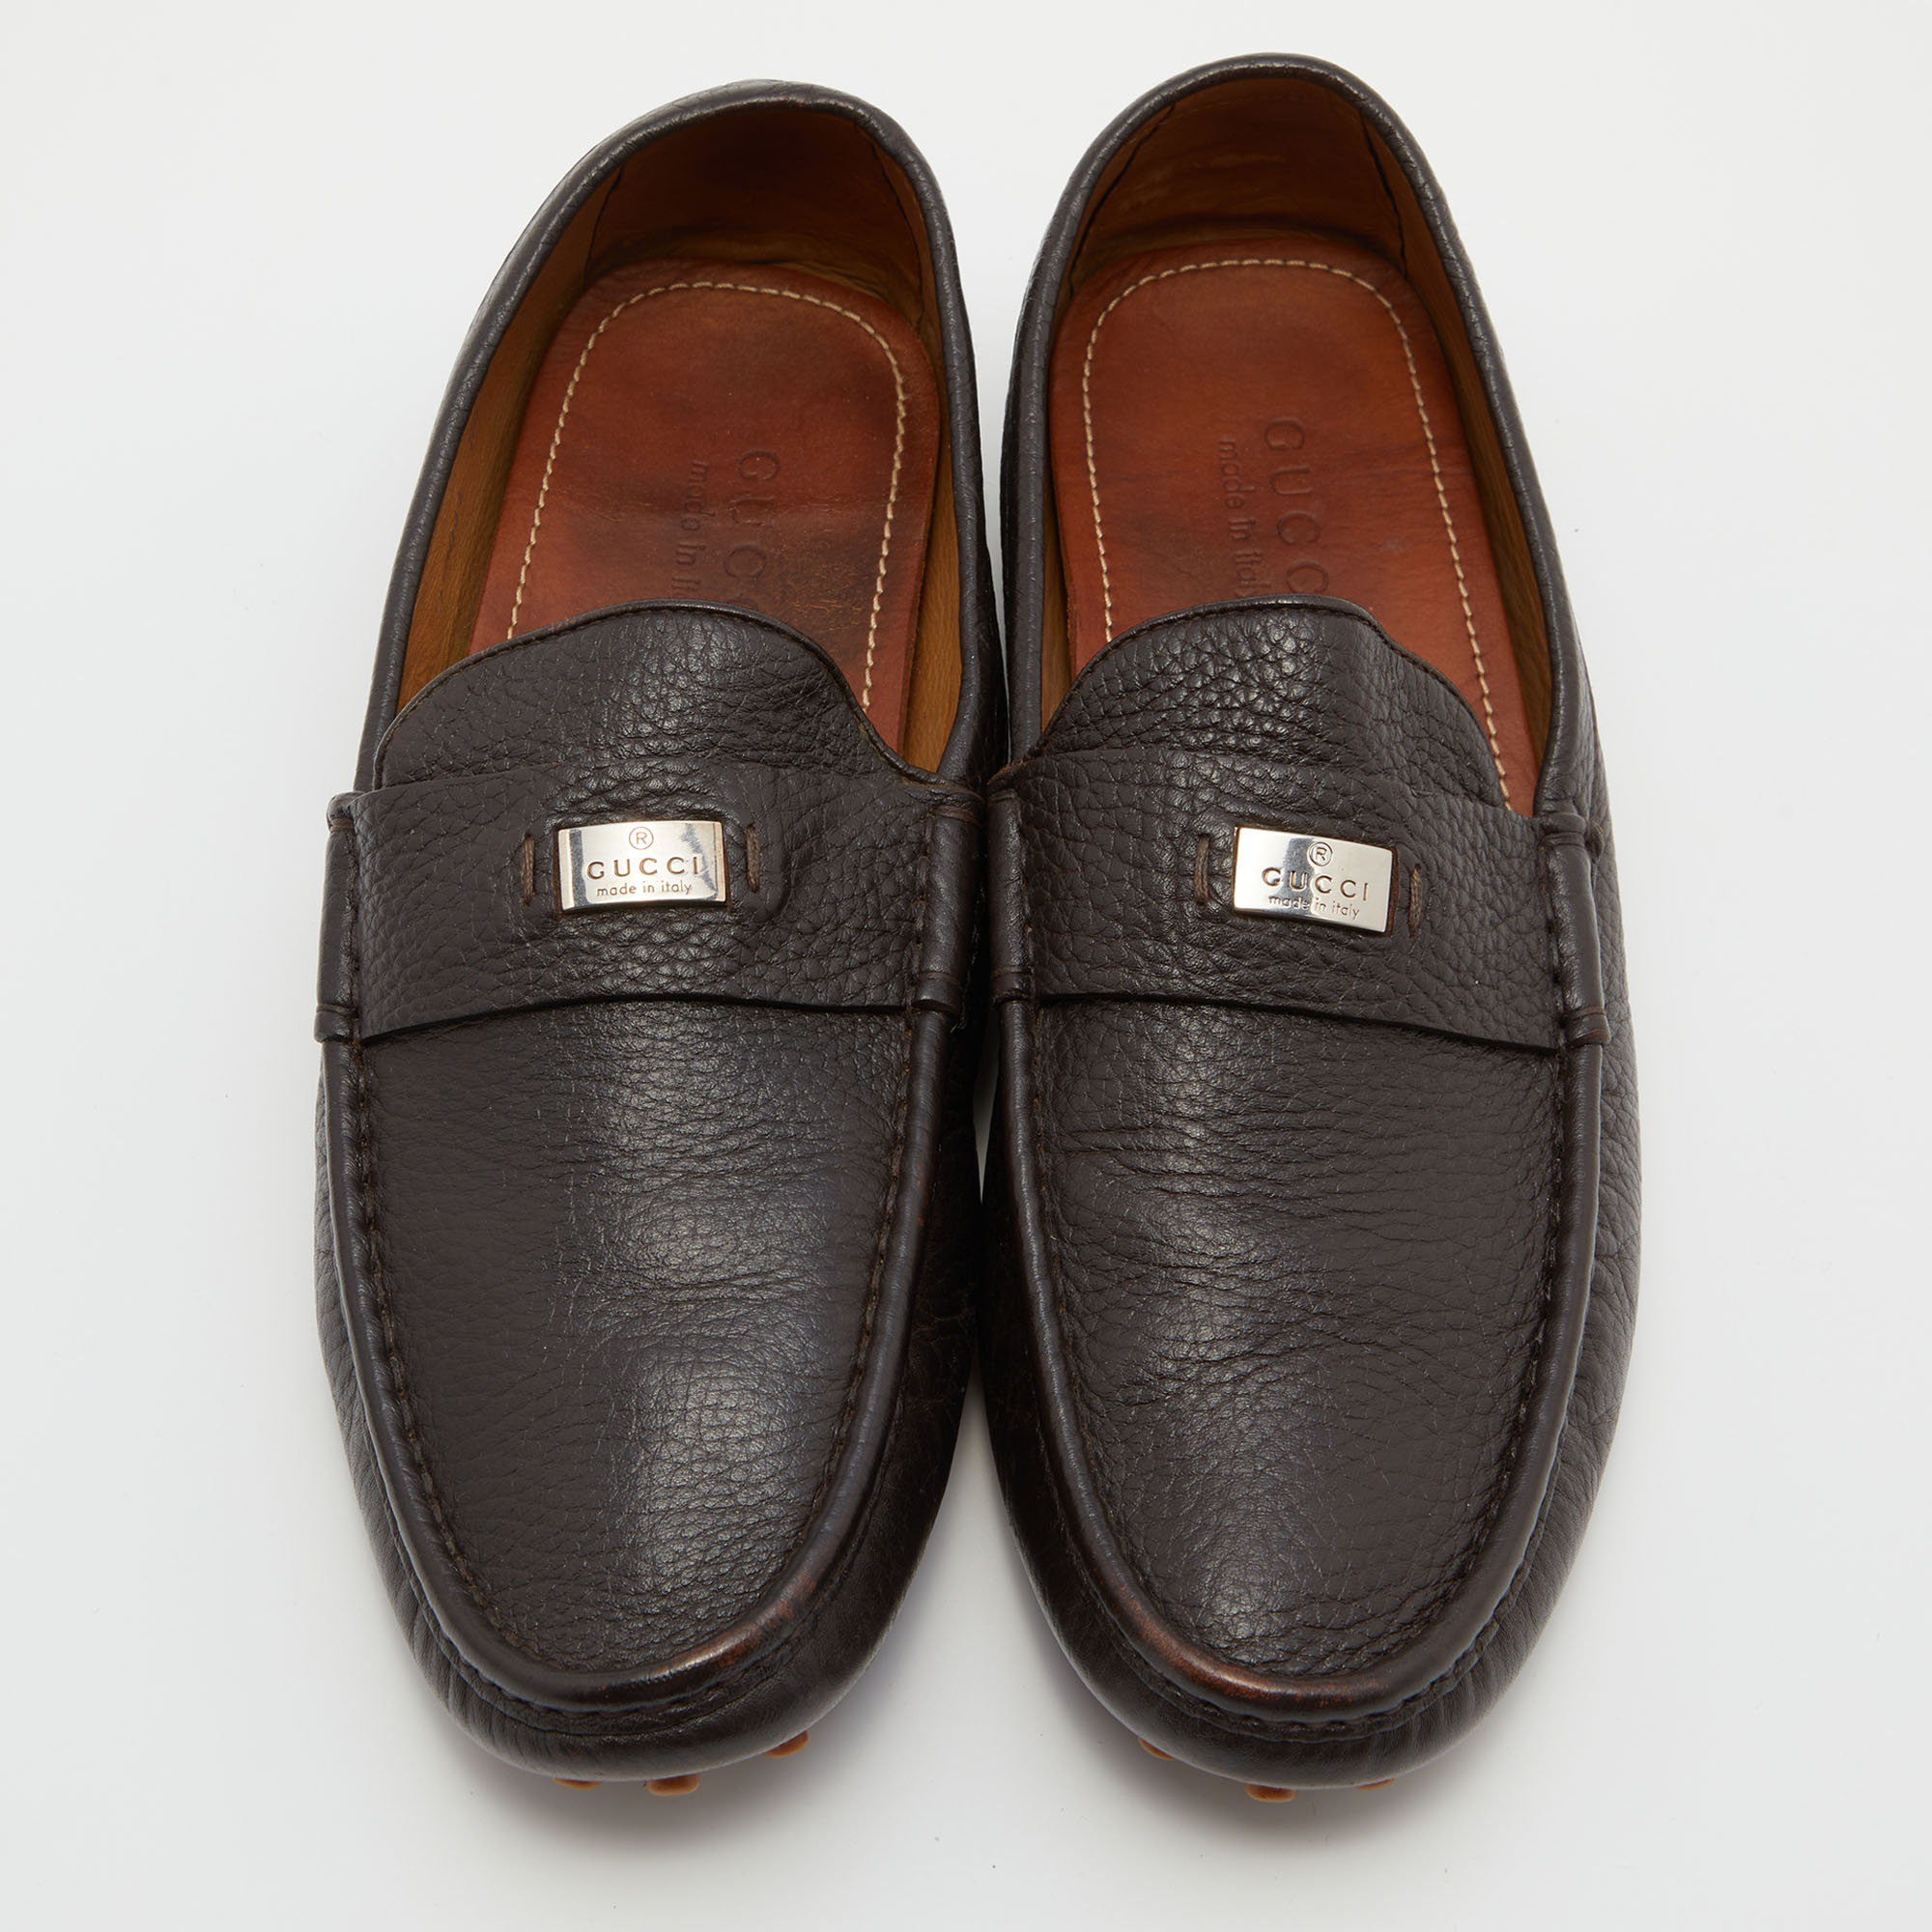 Gucci Dark Brown Leather Slip On Loafers Size 42.5